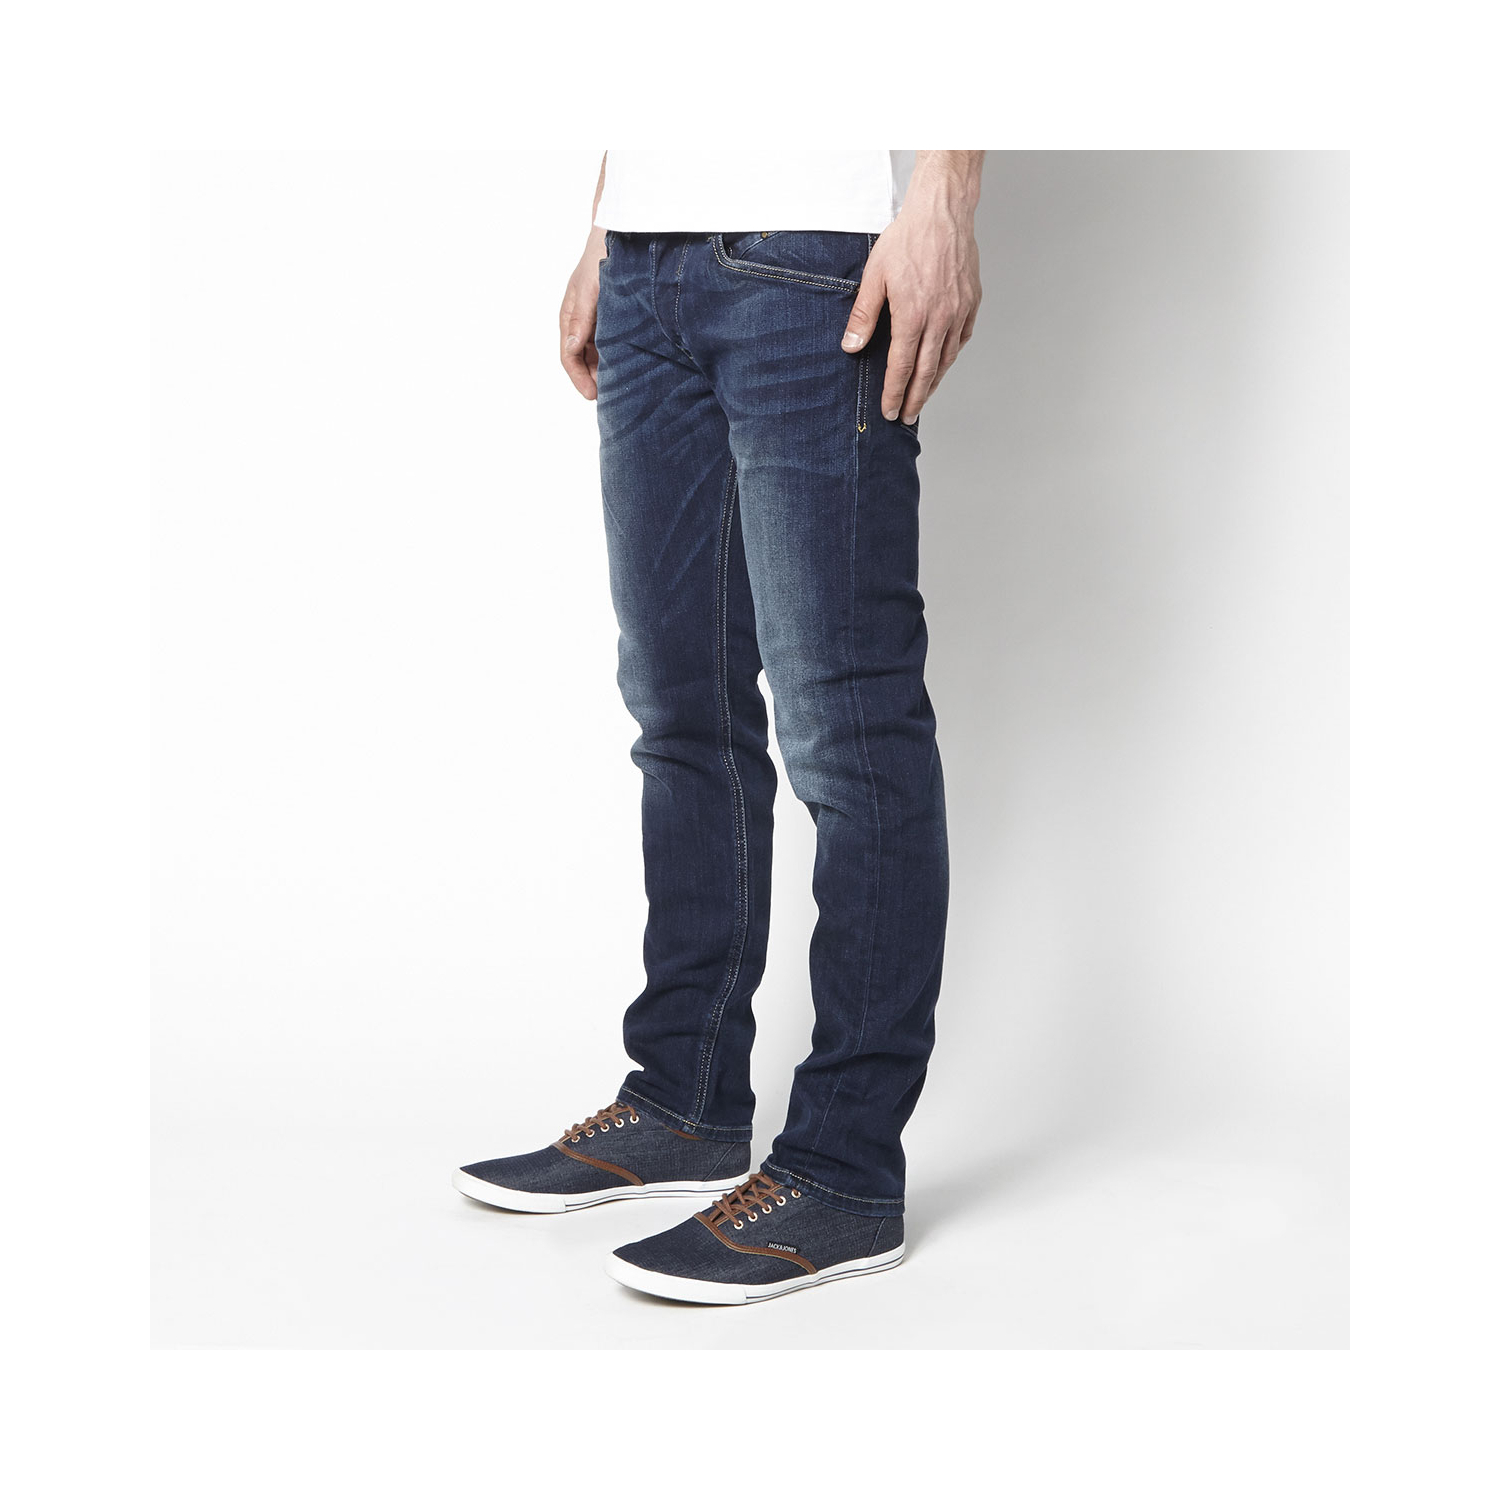 Slim Belther Jeans Navy